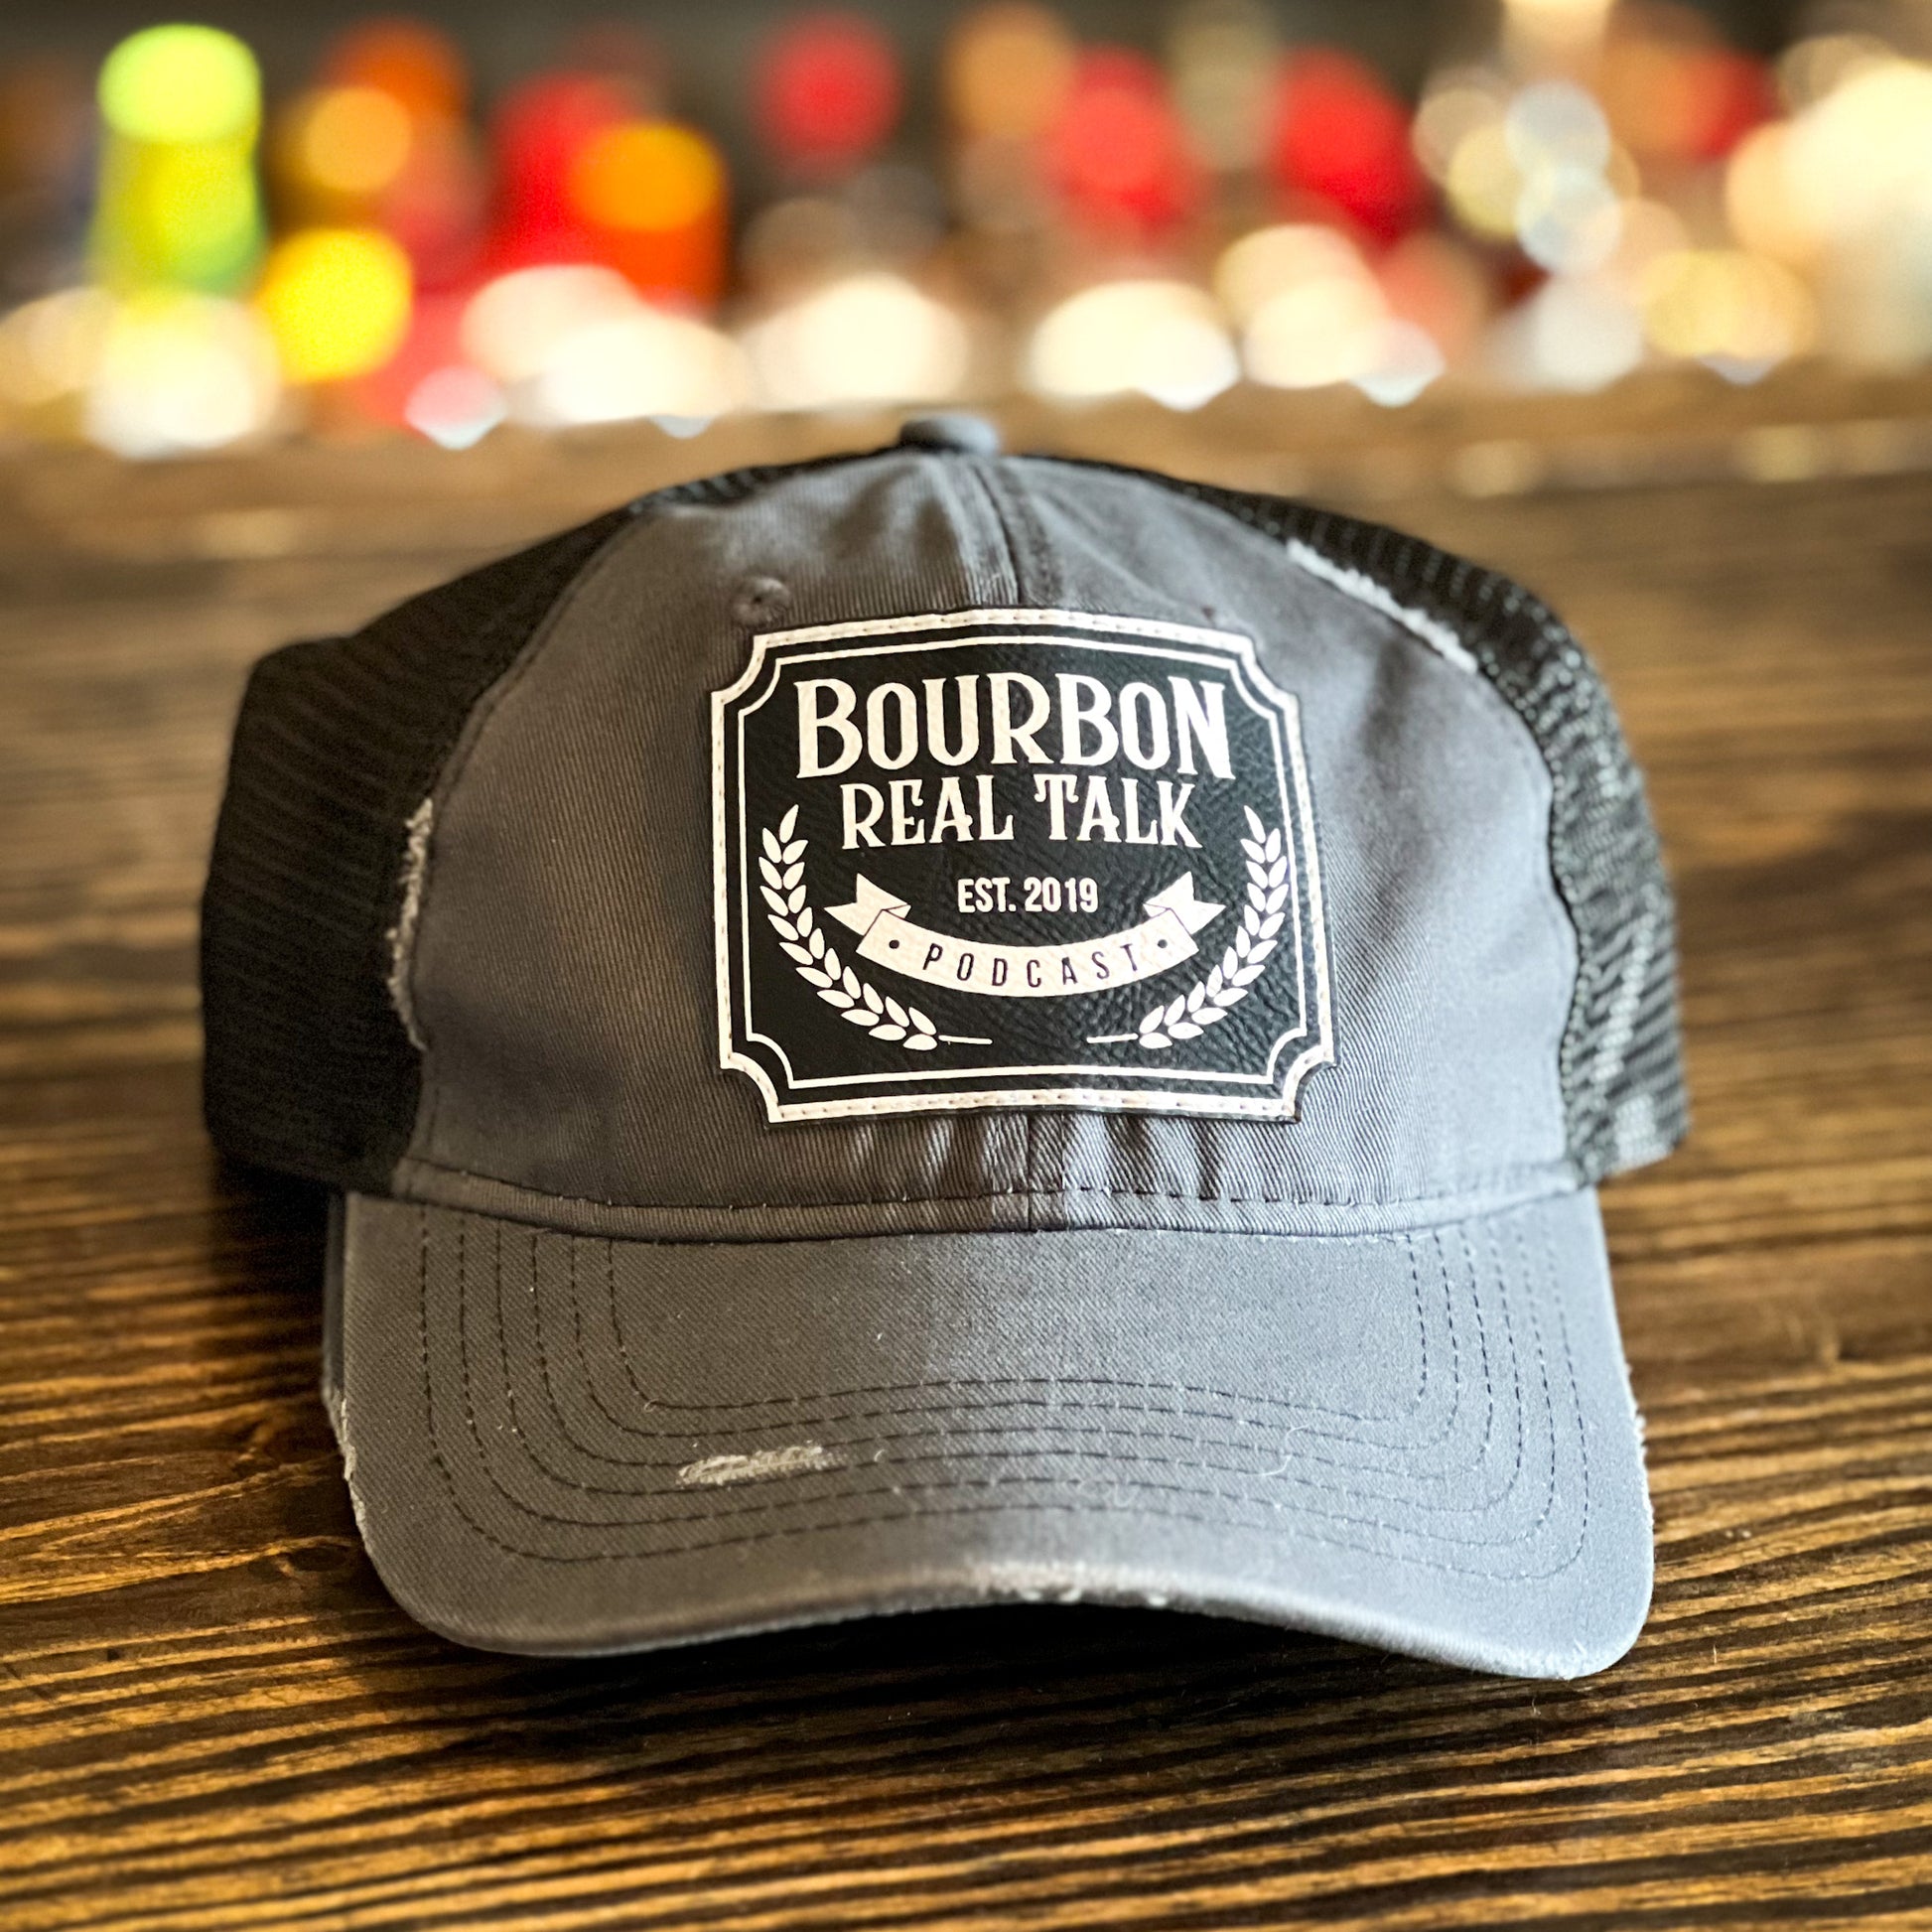 Structured Trucker Hat with Leather Logo Patch